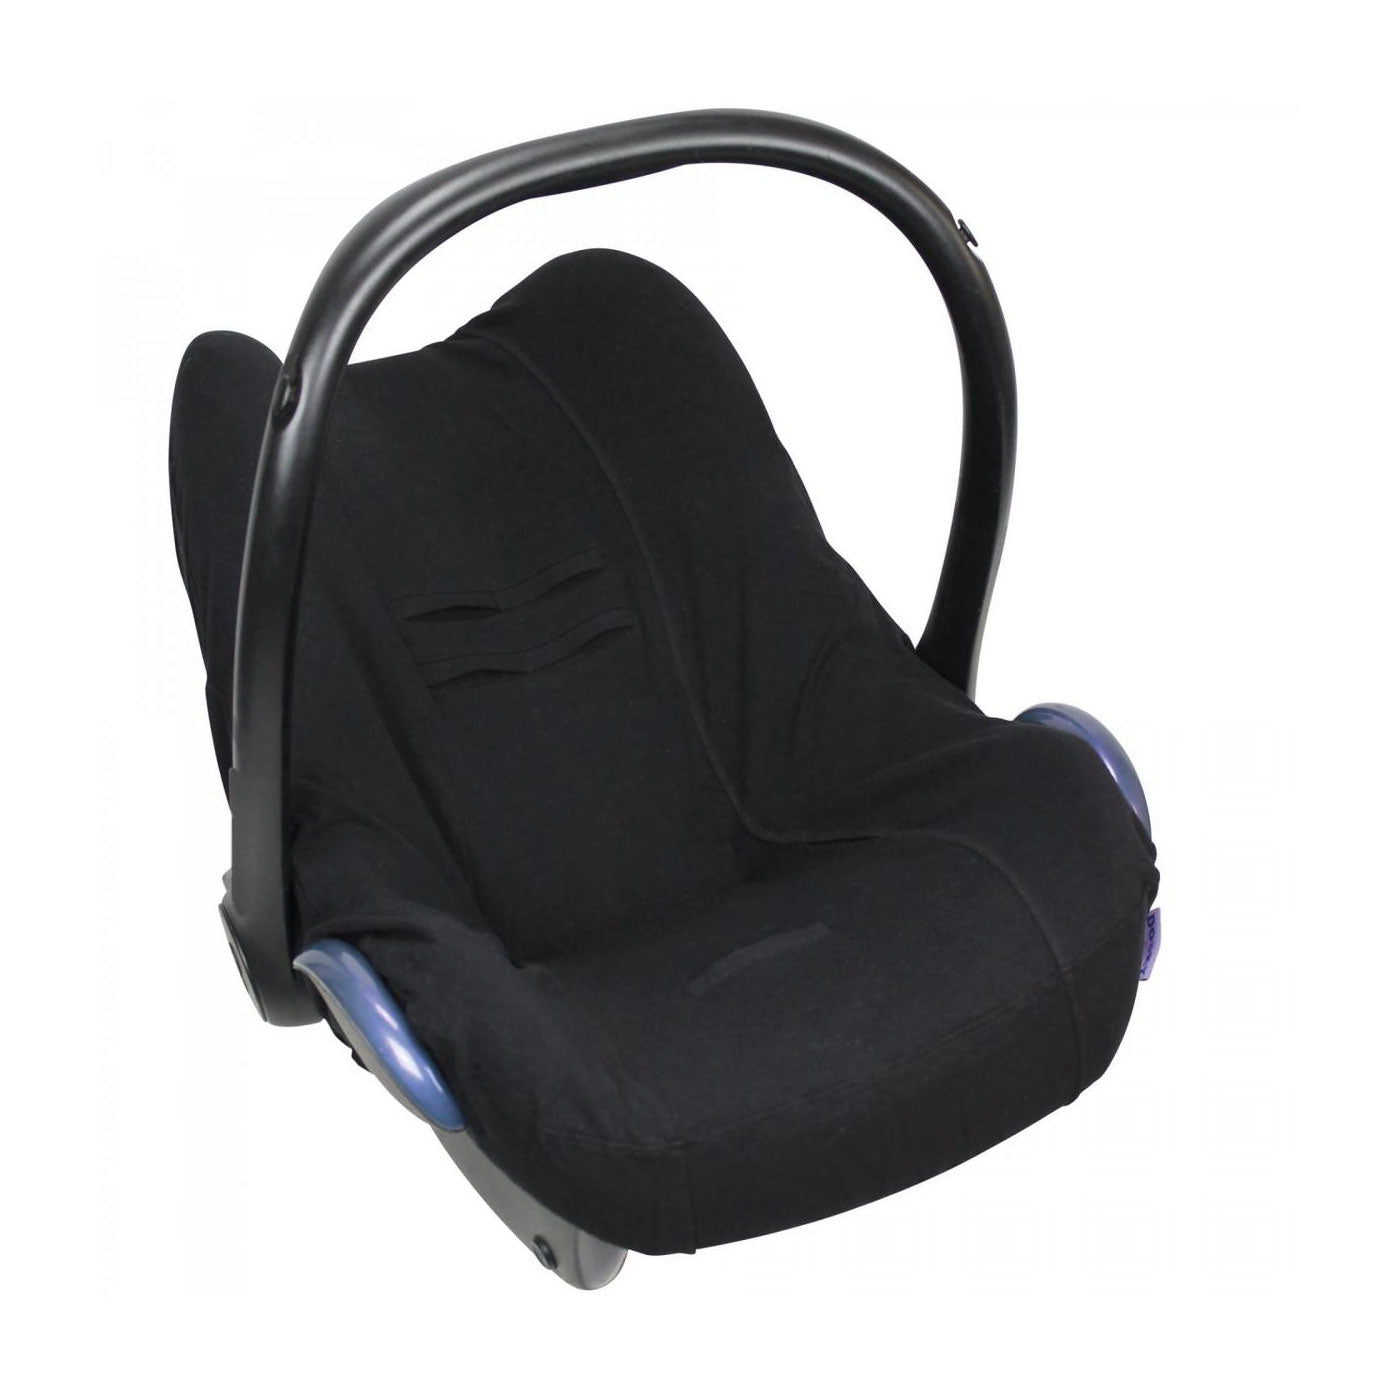 The Seat Cover gives a soft and comfortable ride for your baby and helps keep them cool whilst protecting the seat itself. Update an older car seat to give a fresh new look. They can be easily removed and washed so any spills or dirt can be cleaned up quickly.